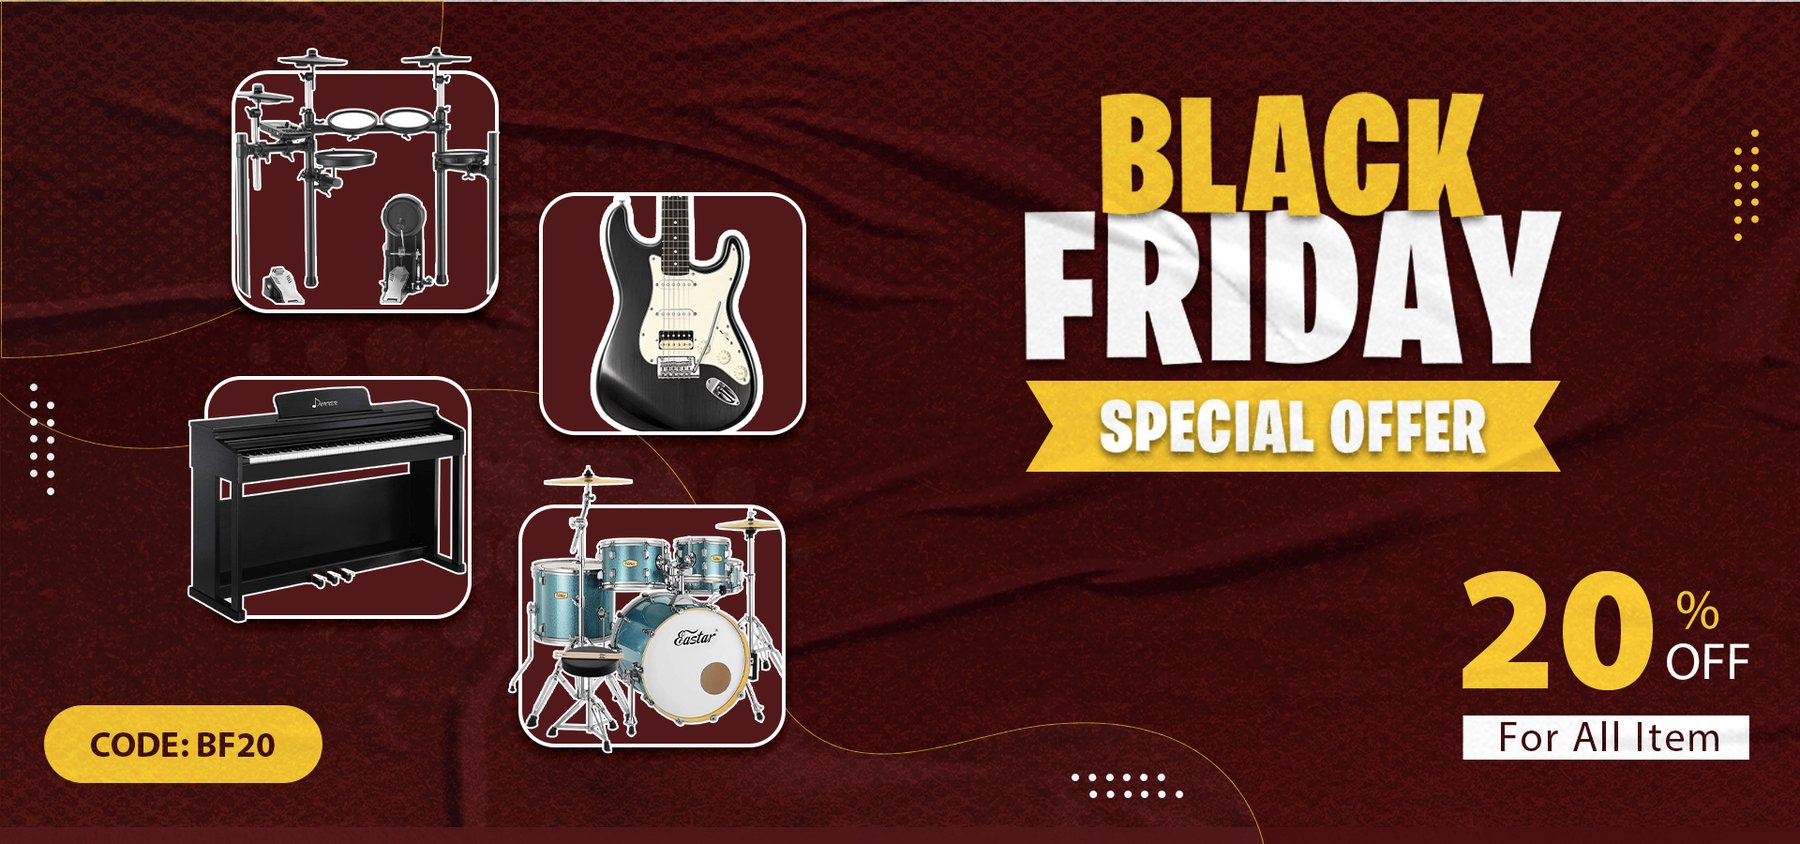 Donner Music Black Friday special extra 20% OFF on all items with coupon including guitars, pianos